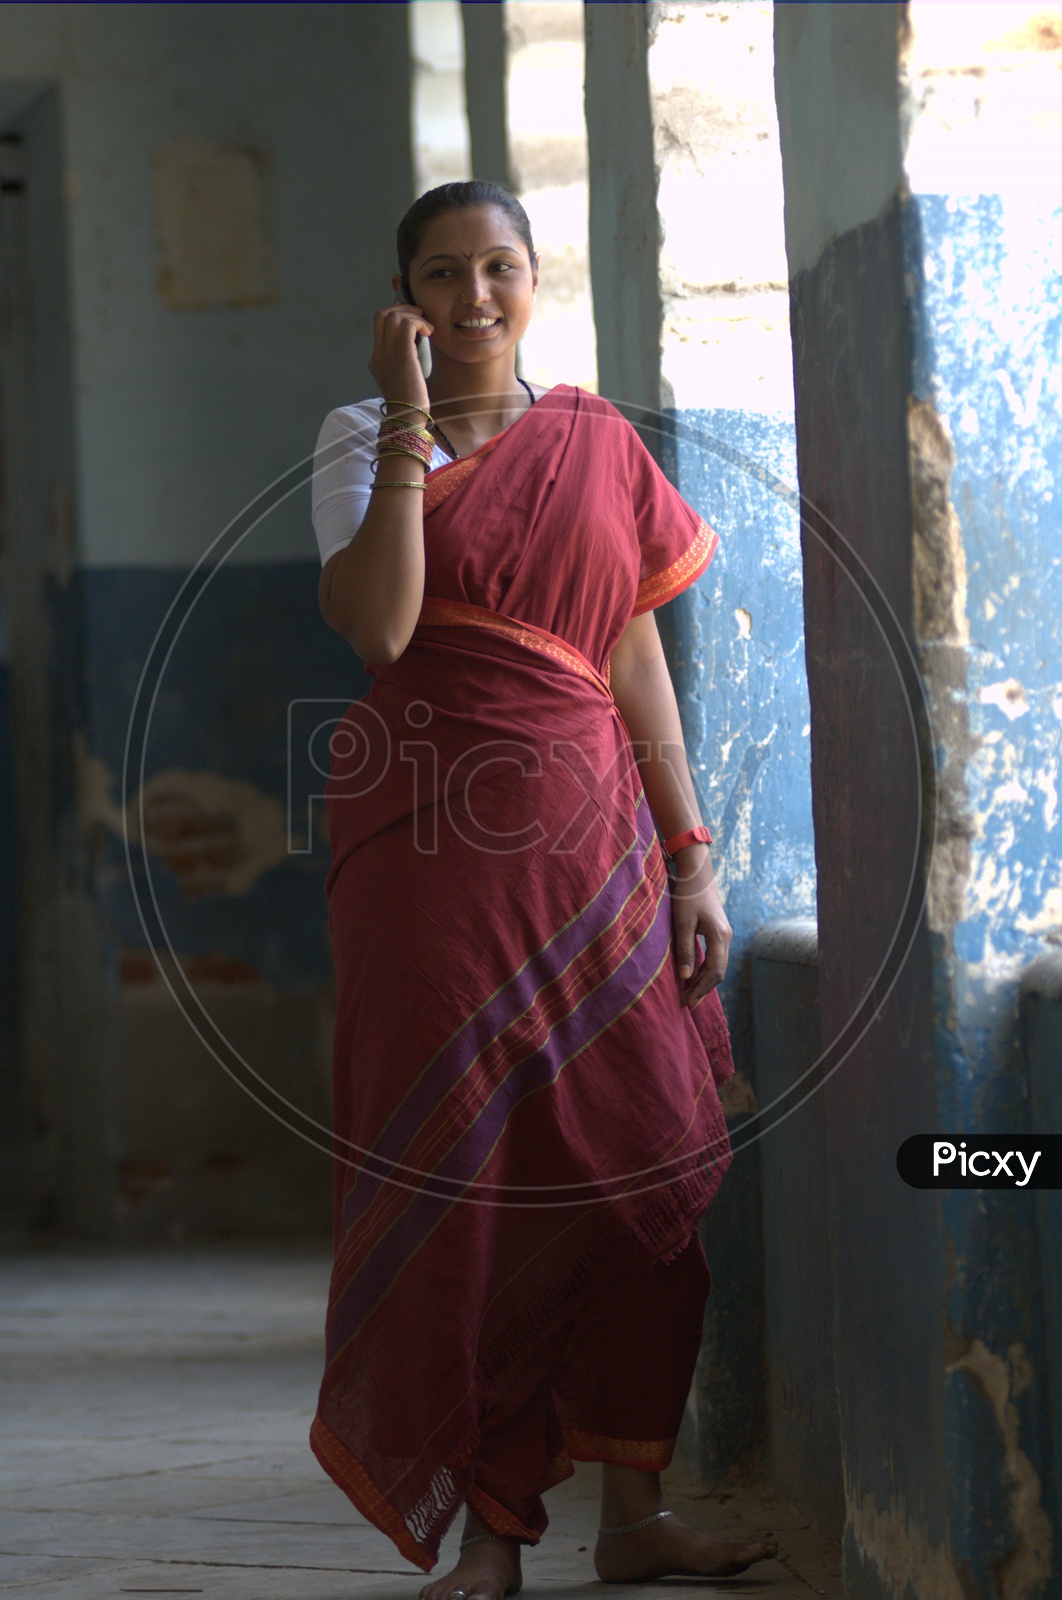 Indian Rural Woman Speaking In CellPhone